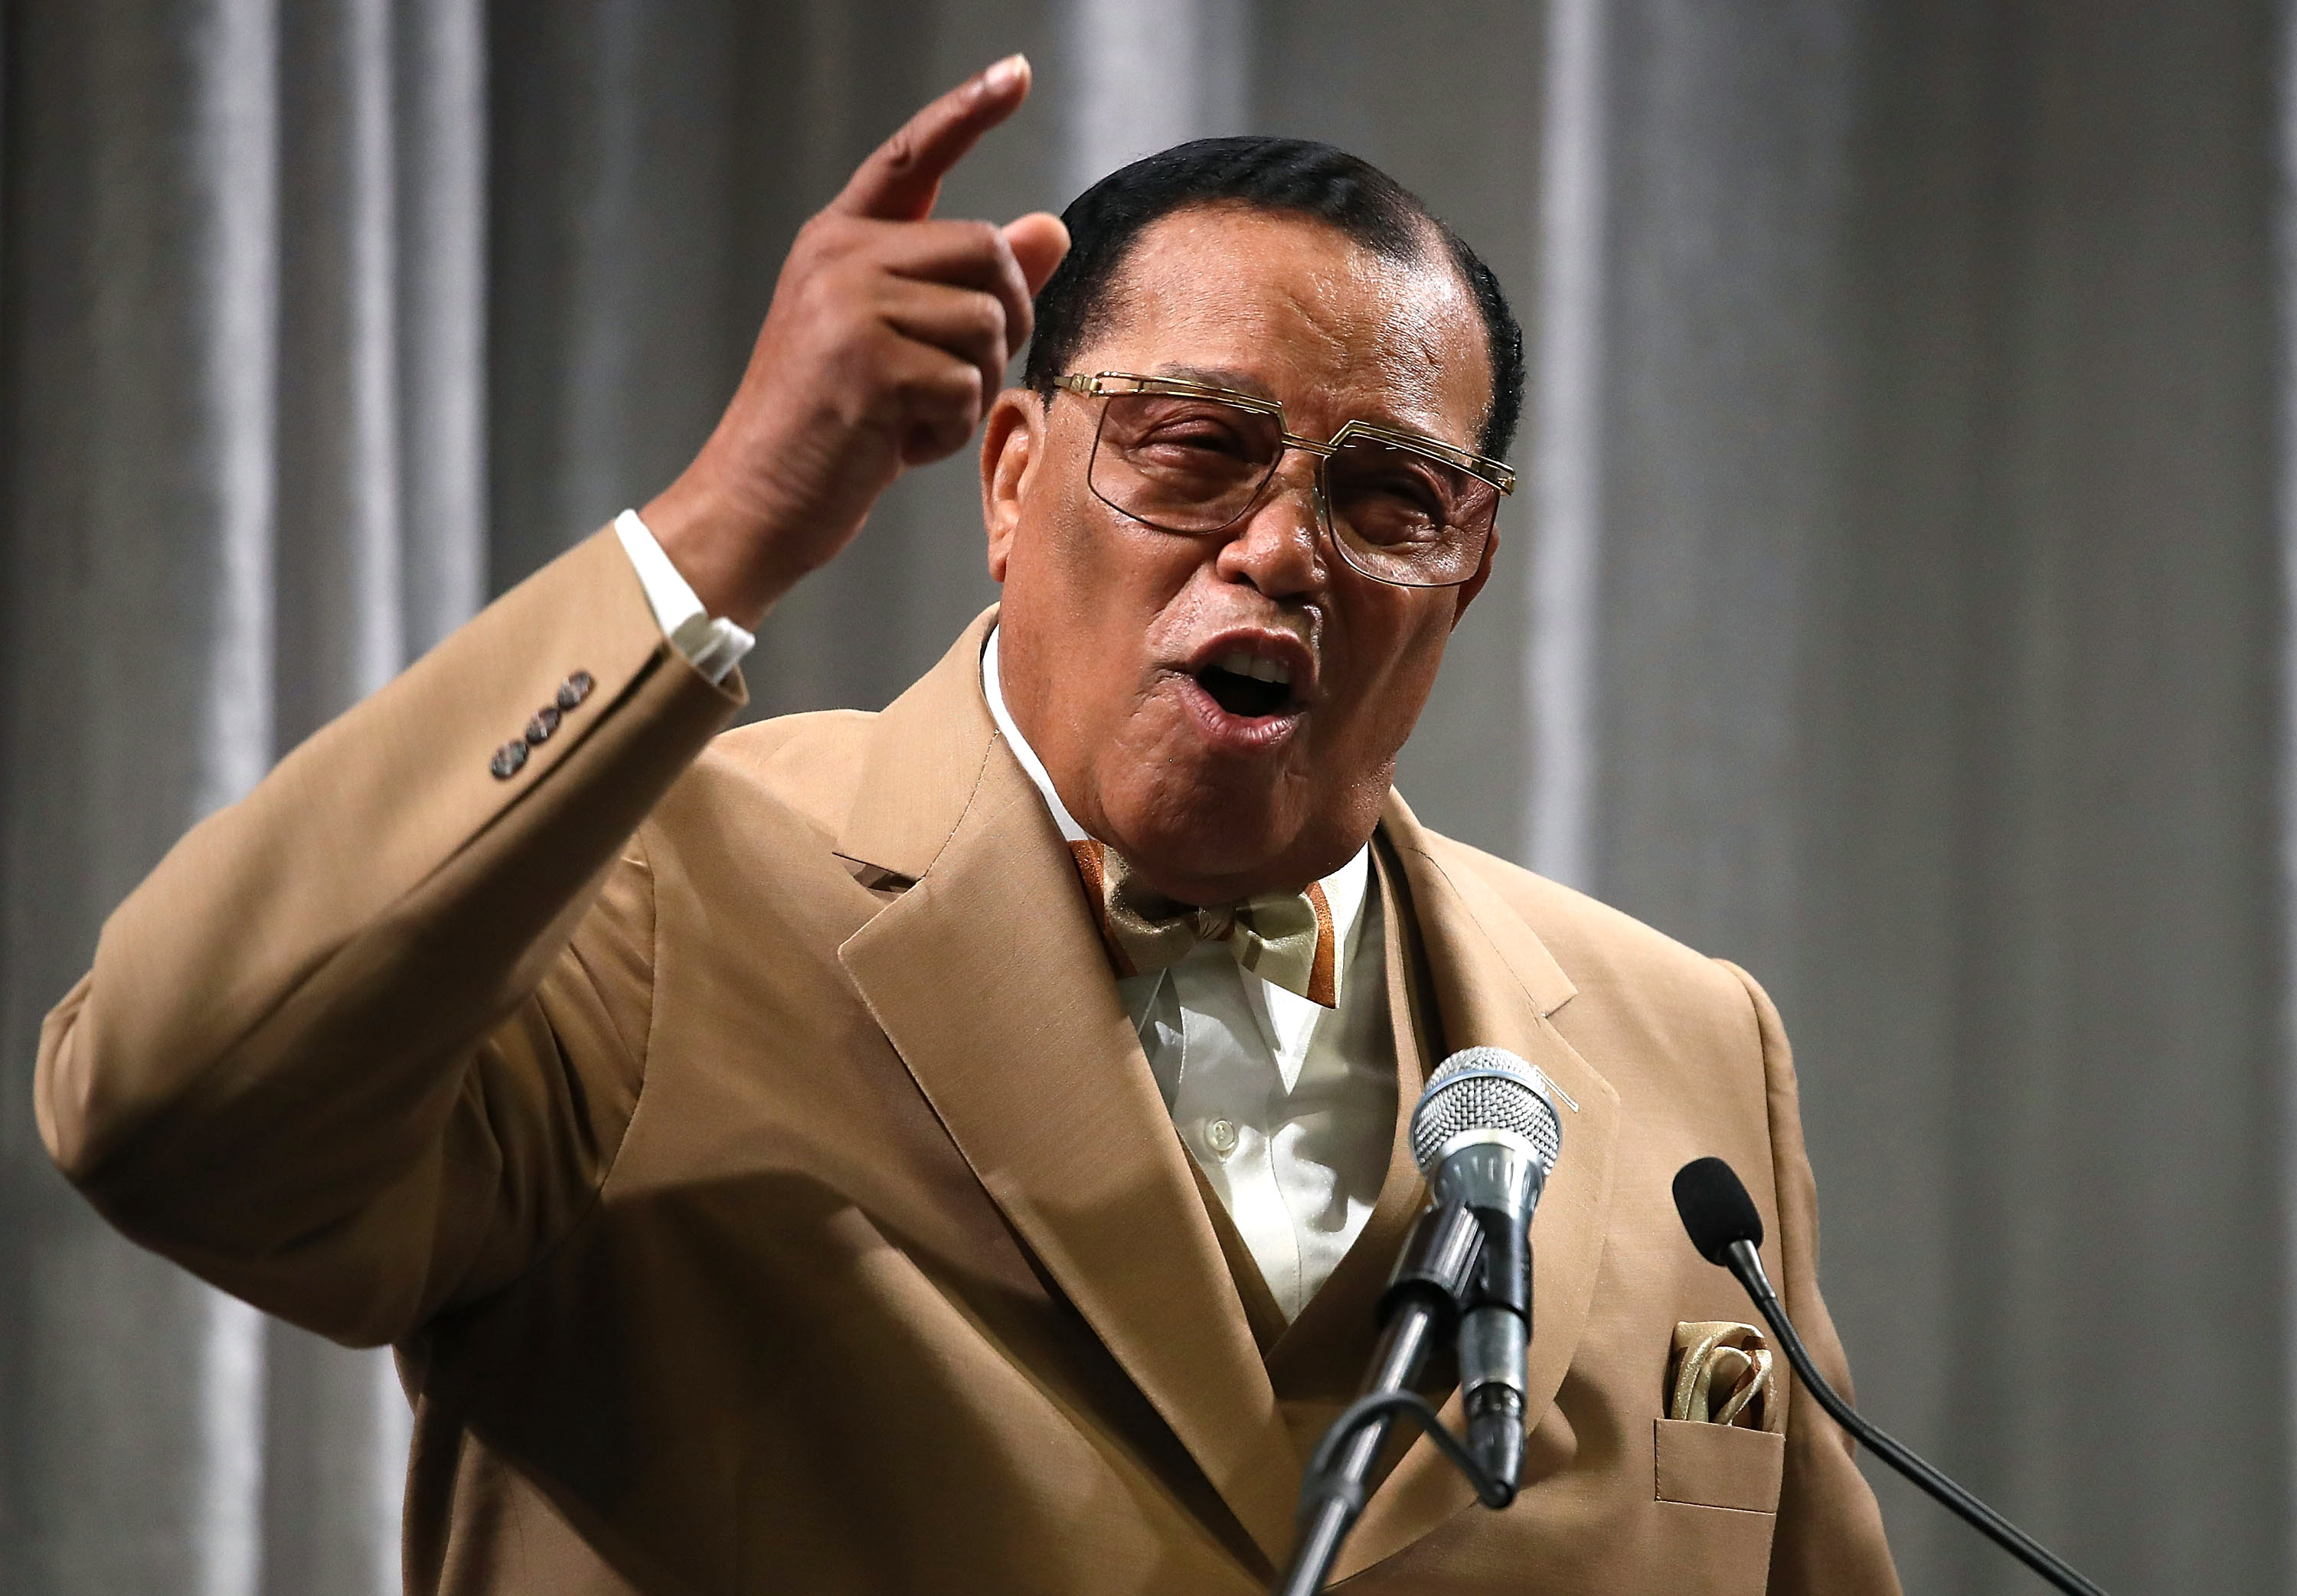 WASHINGTON, DC - NOVEMBER 16: Nation of Islam Minister Louis Farrakhan delivers a speech and talks about U.S. President Donald Trump, at the Watergate Hotel, on November 16, 2017 in Washington, DC. (Mark Wilson/Getty Images)